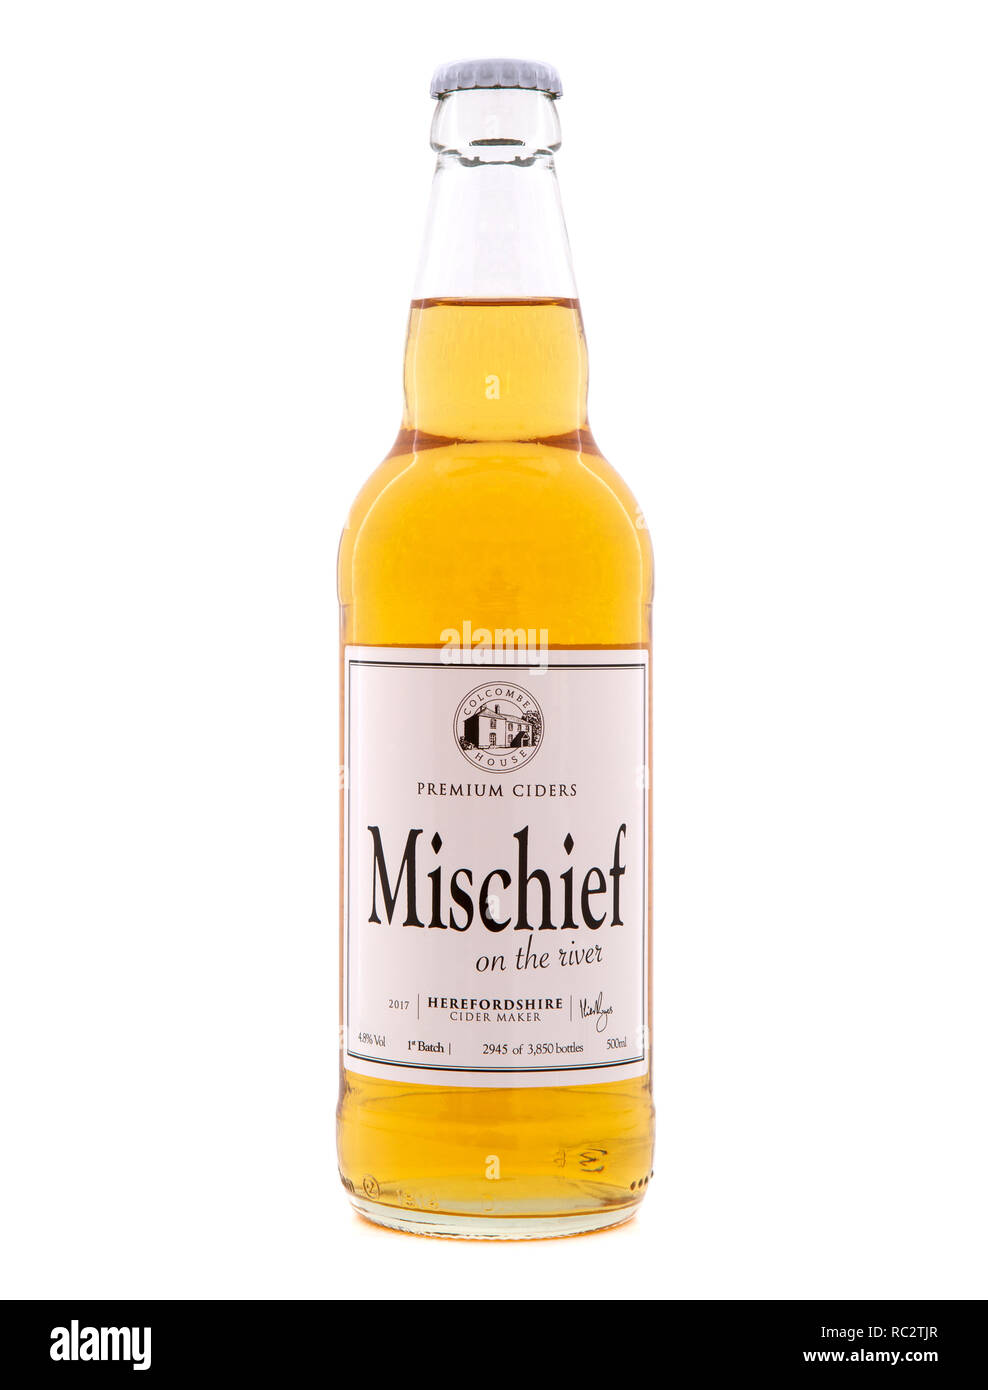 SWINDON, UK - JANUARY 13, 2019: Mischief on the river Premium Cider from Colcombe house the Herefordshire cider makers Stock Photo